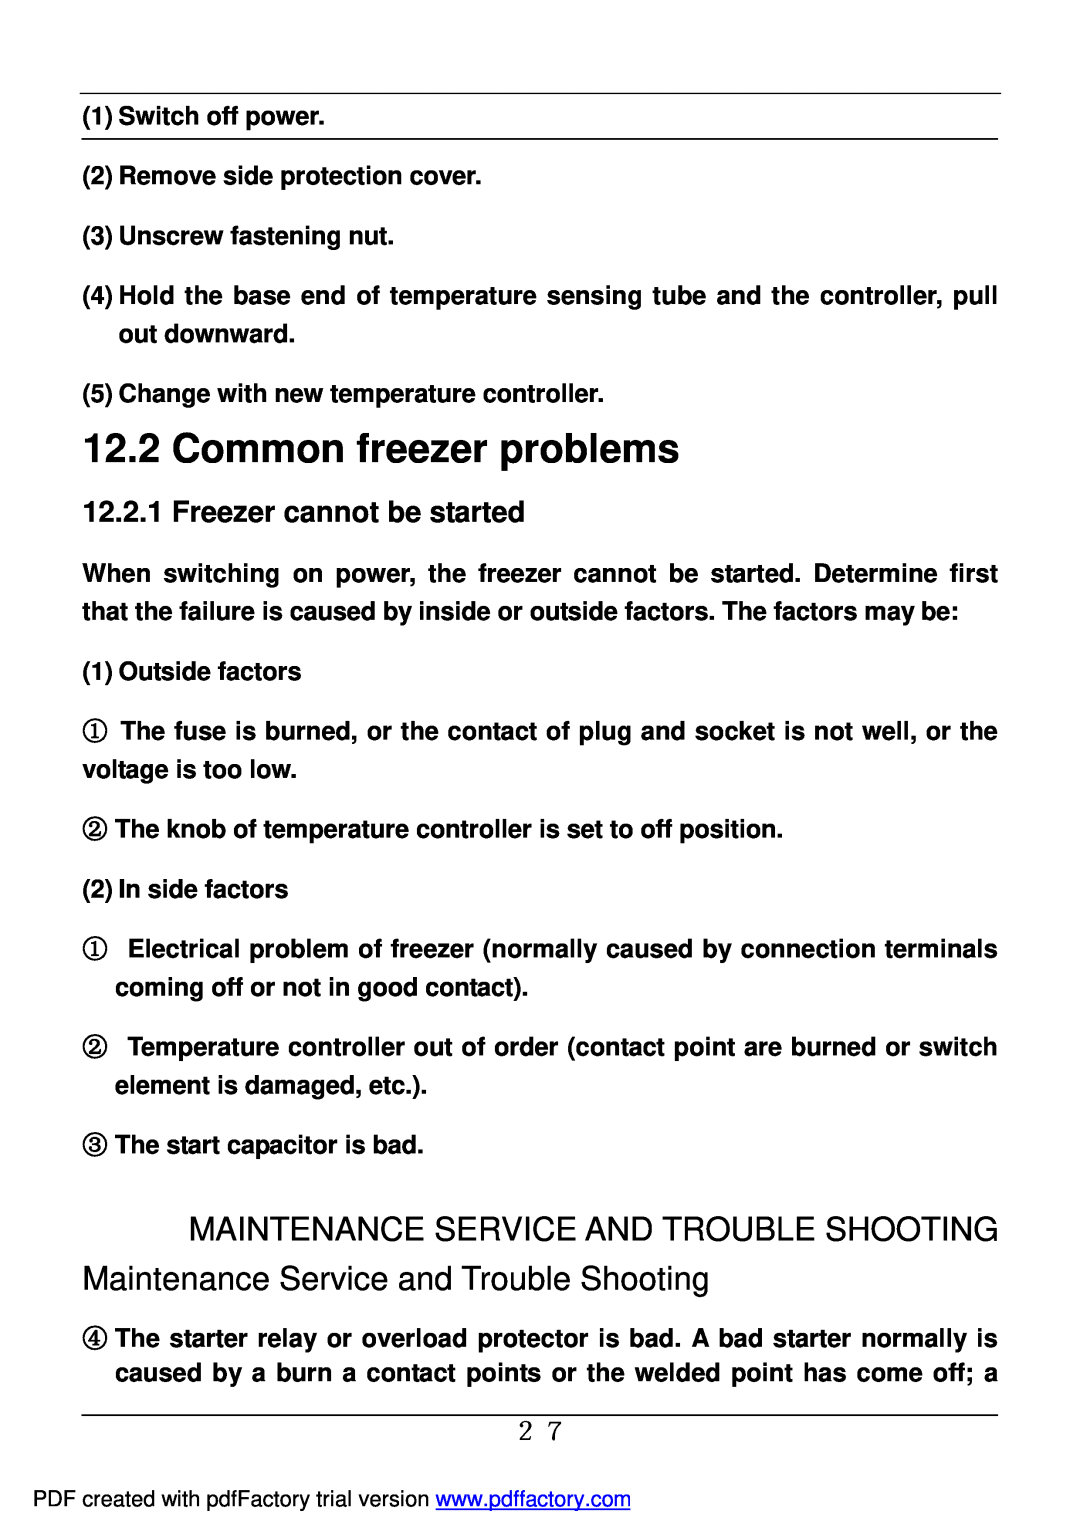 Haier BD-478A service manual Common freezer problems, Freezer cannot be started 